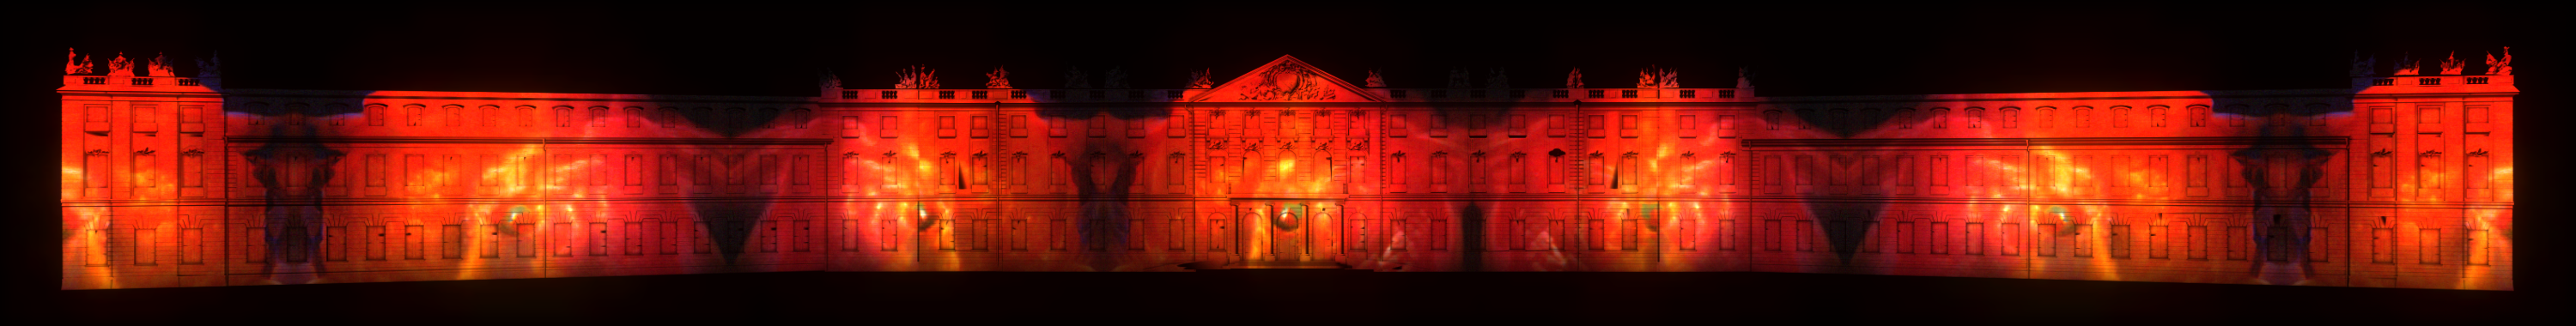 On the facade of the castle in Karlsruhe you can see a projection mapping that glows at night.The mapping is completely red with orange elements, possibly fire is shown.